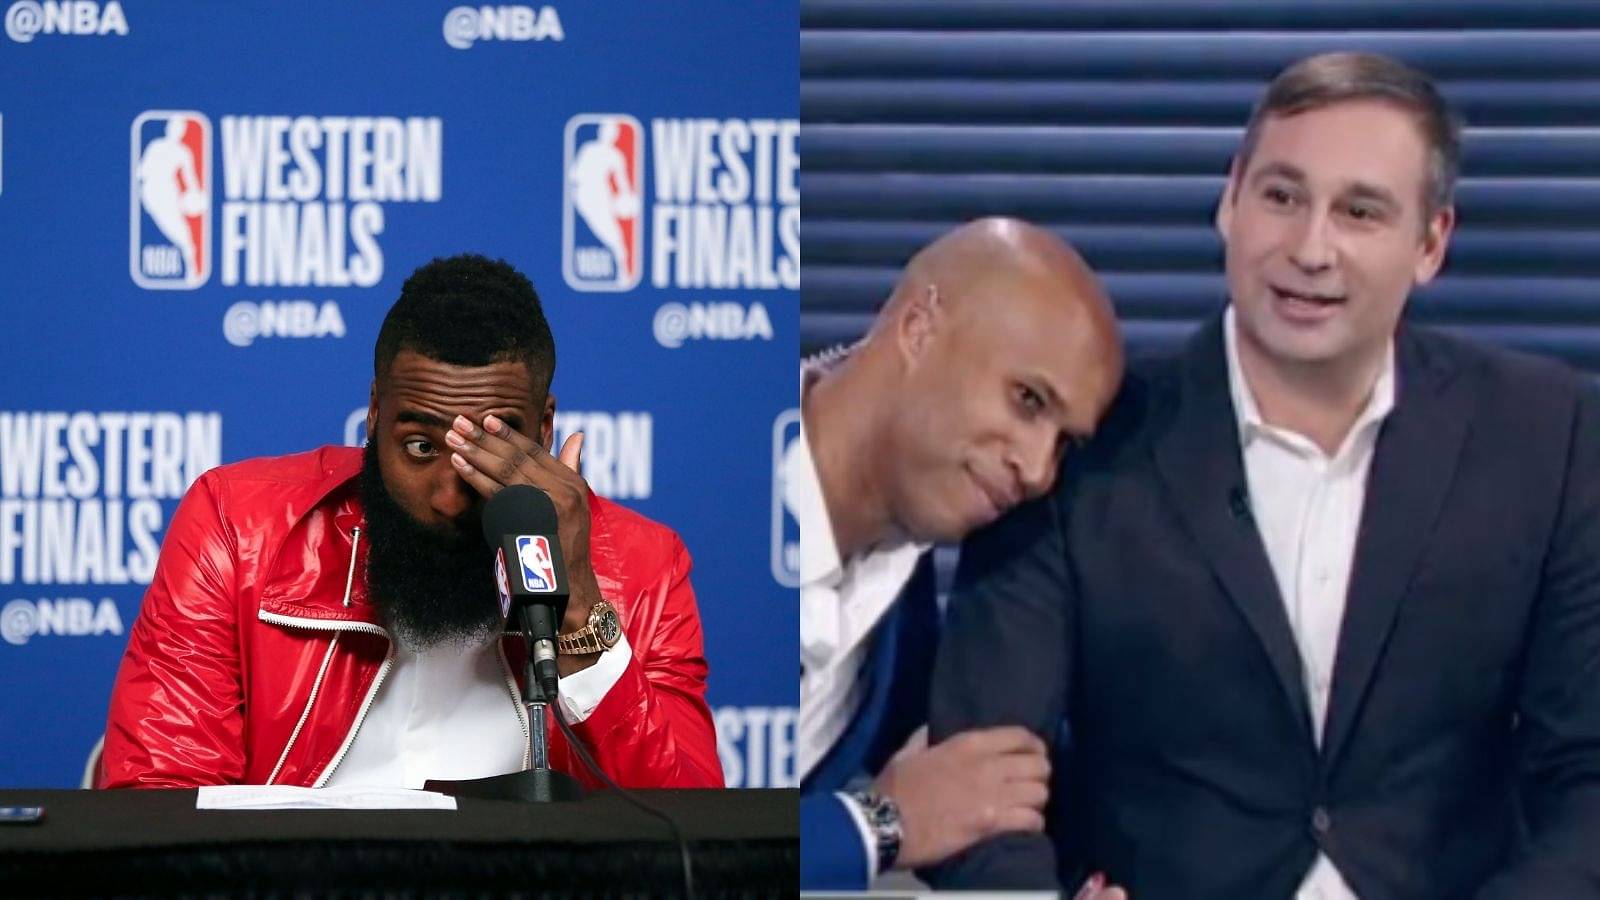 "James Harden's postseason resume is justifiably defined by meltdowns": ESPN's Zach Lowe breaks down Playoffs miseries of new Sixers guard as they become a top contender from East